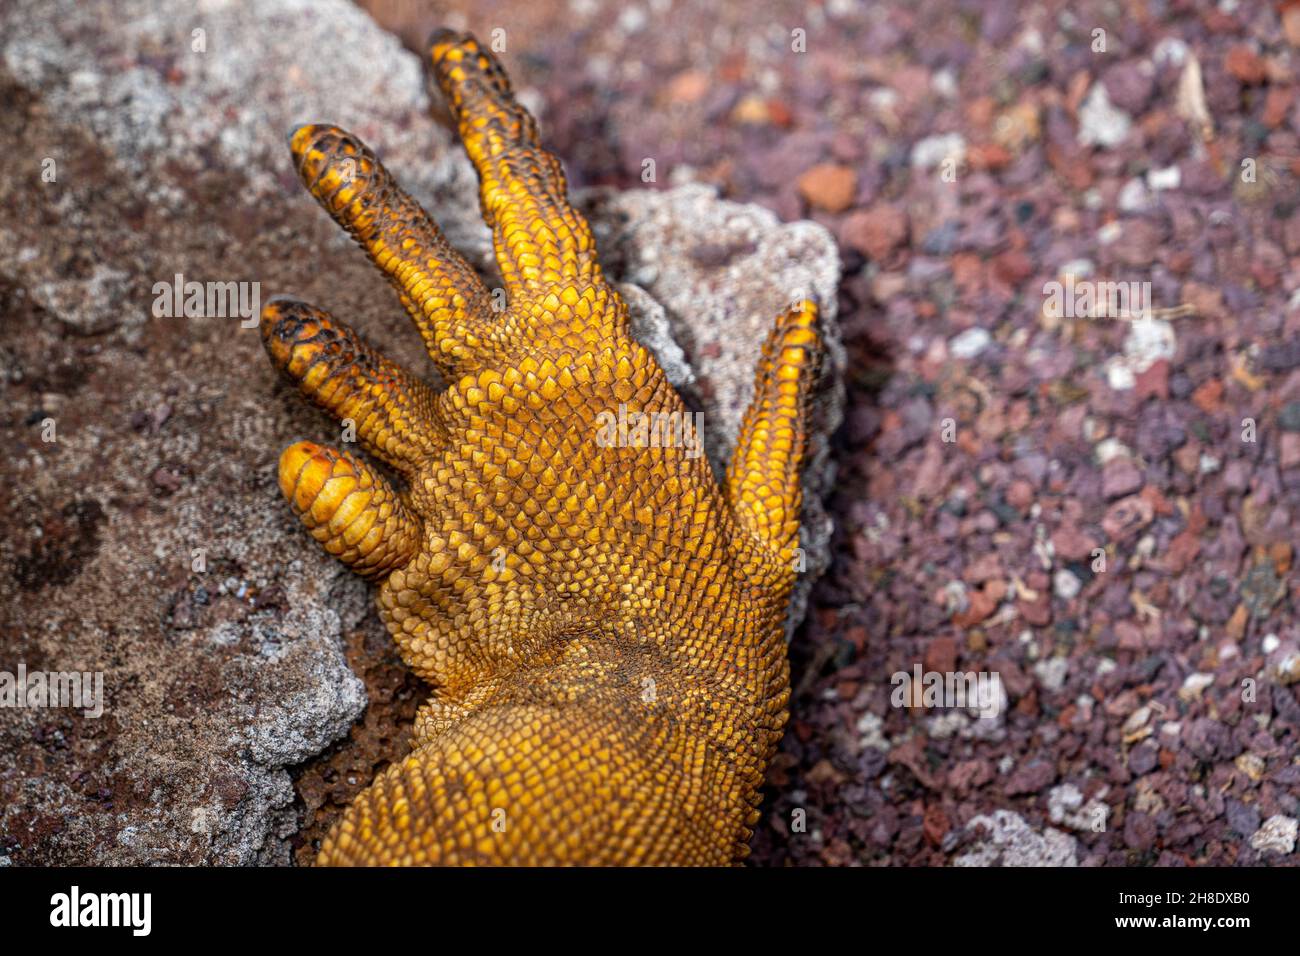 Close-up shot of a lizard hand on a stone surface. Stock Photo